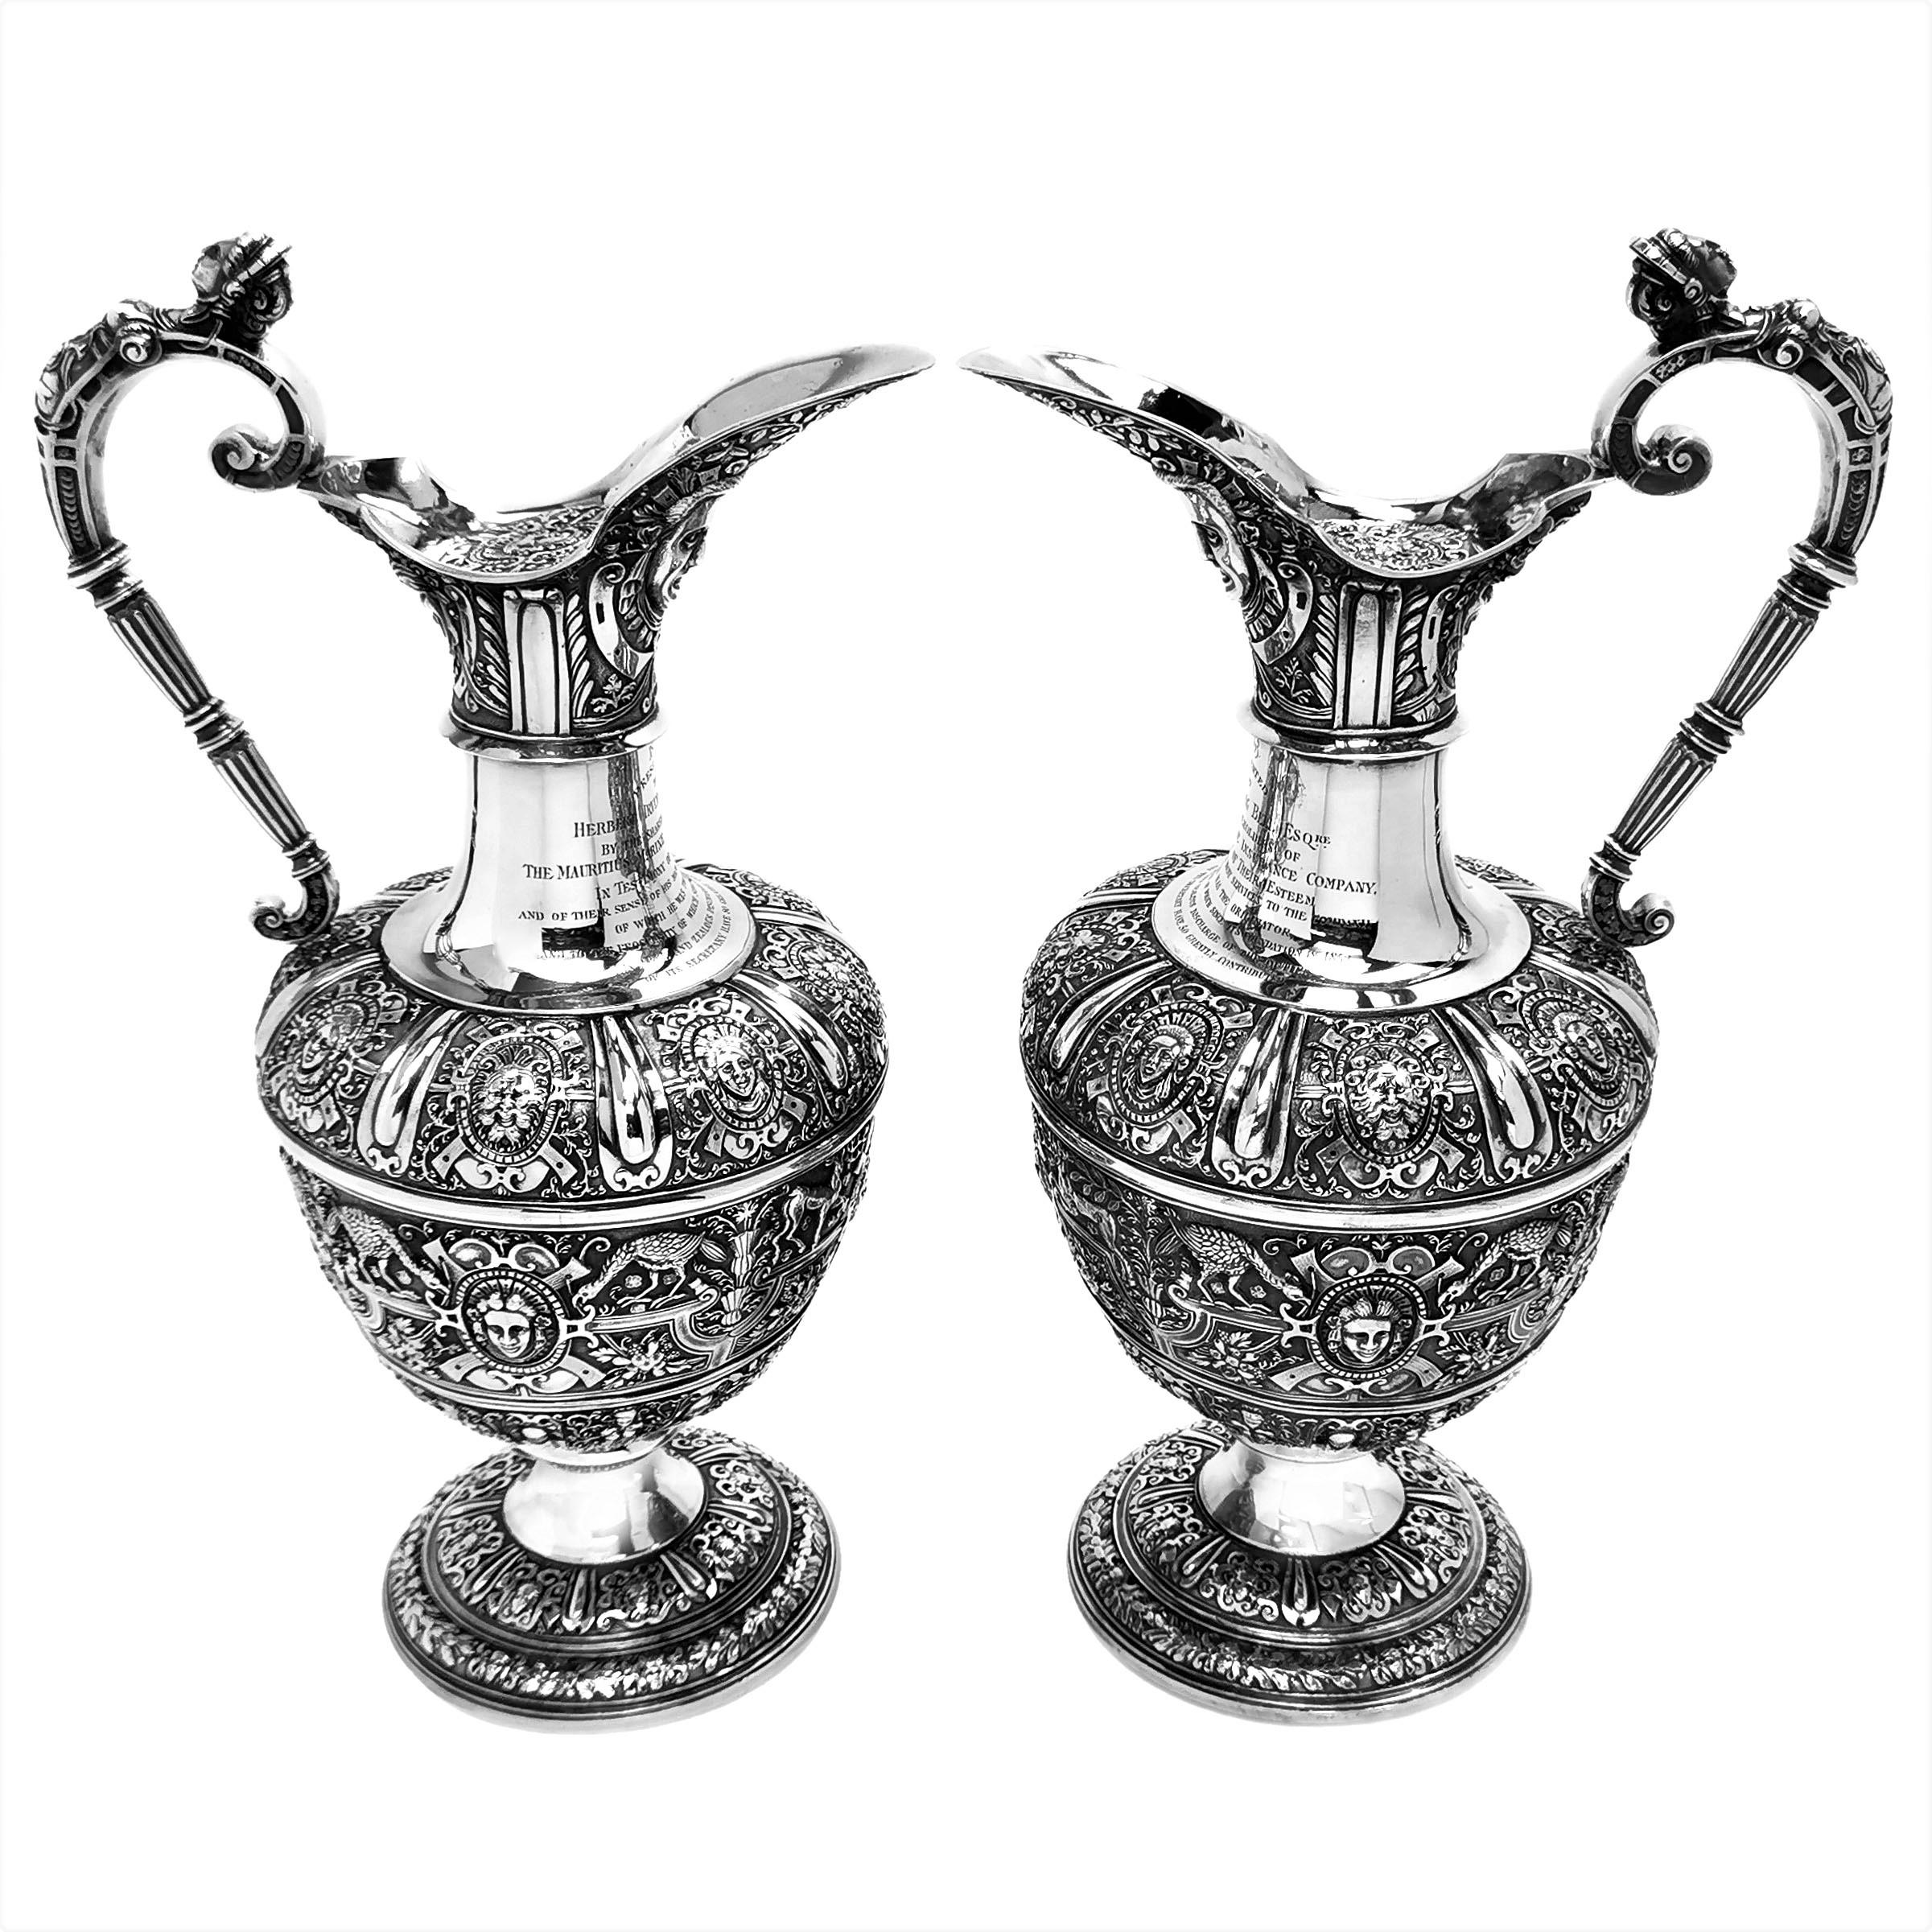 English Pair Antique Victorian Sterling Silver Cellini Jugs / Claret Wine Decanters 1863